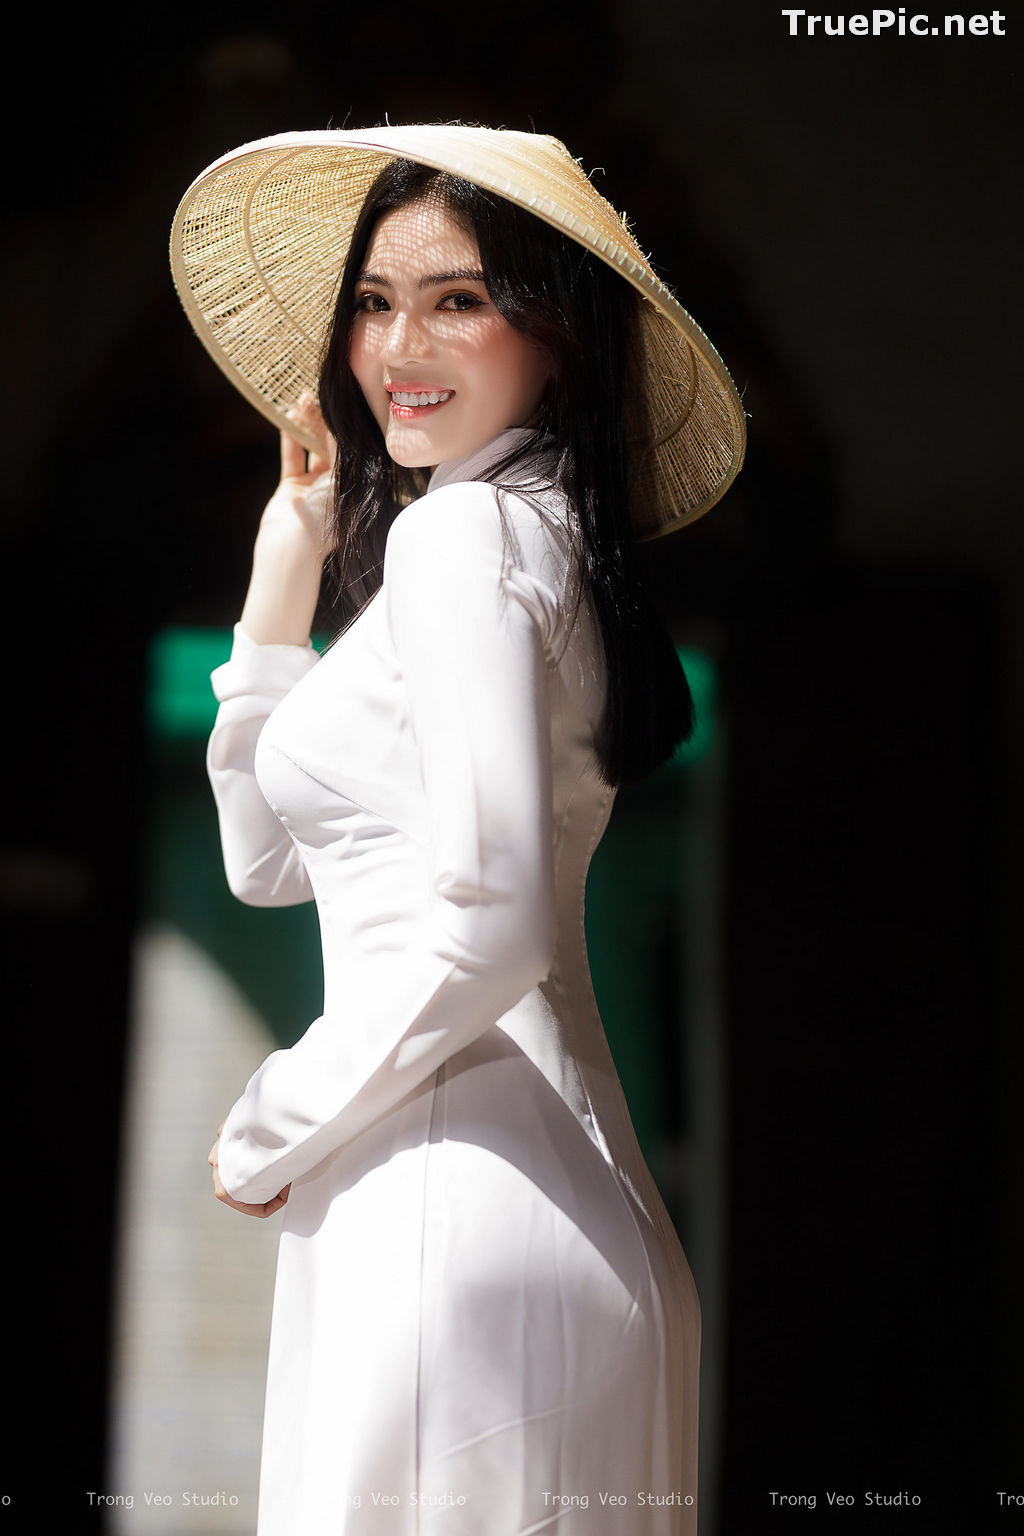 Image The Beauty of Vietnamese Girls with Traditional Dress (Ao Dai) #2 - TruePic.net - Picture-89